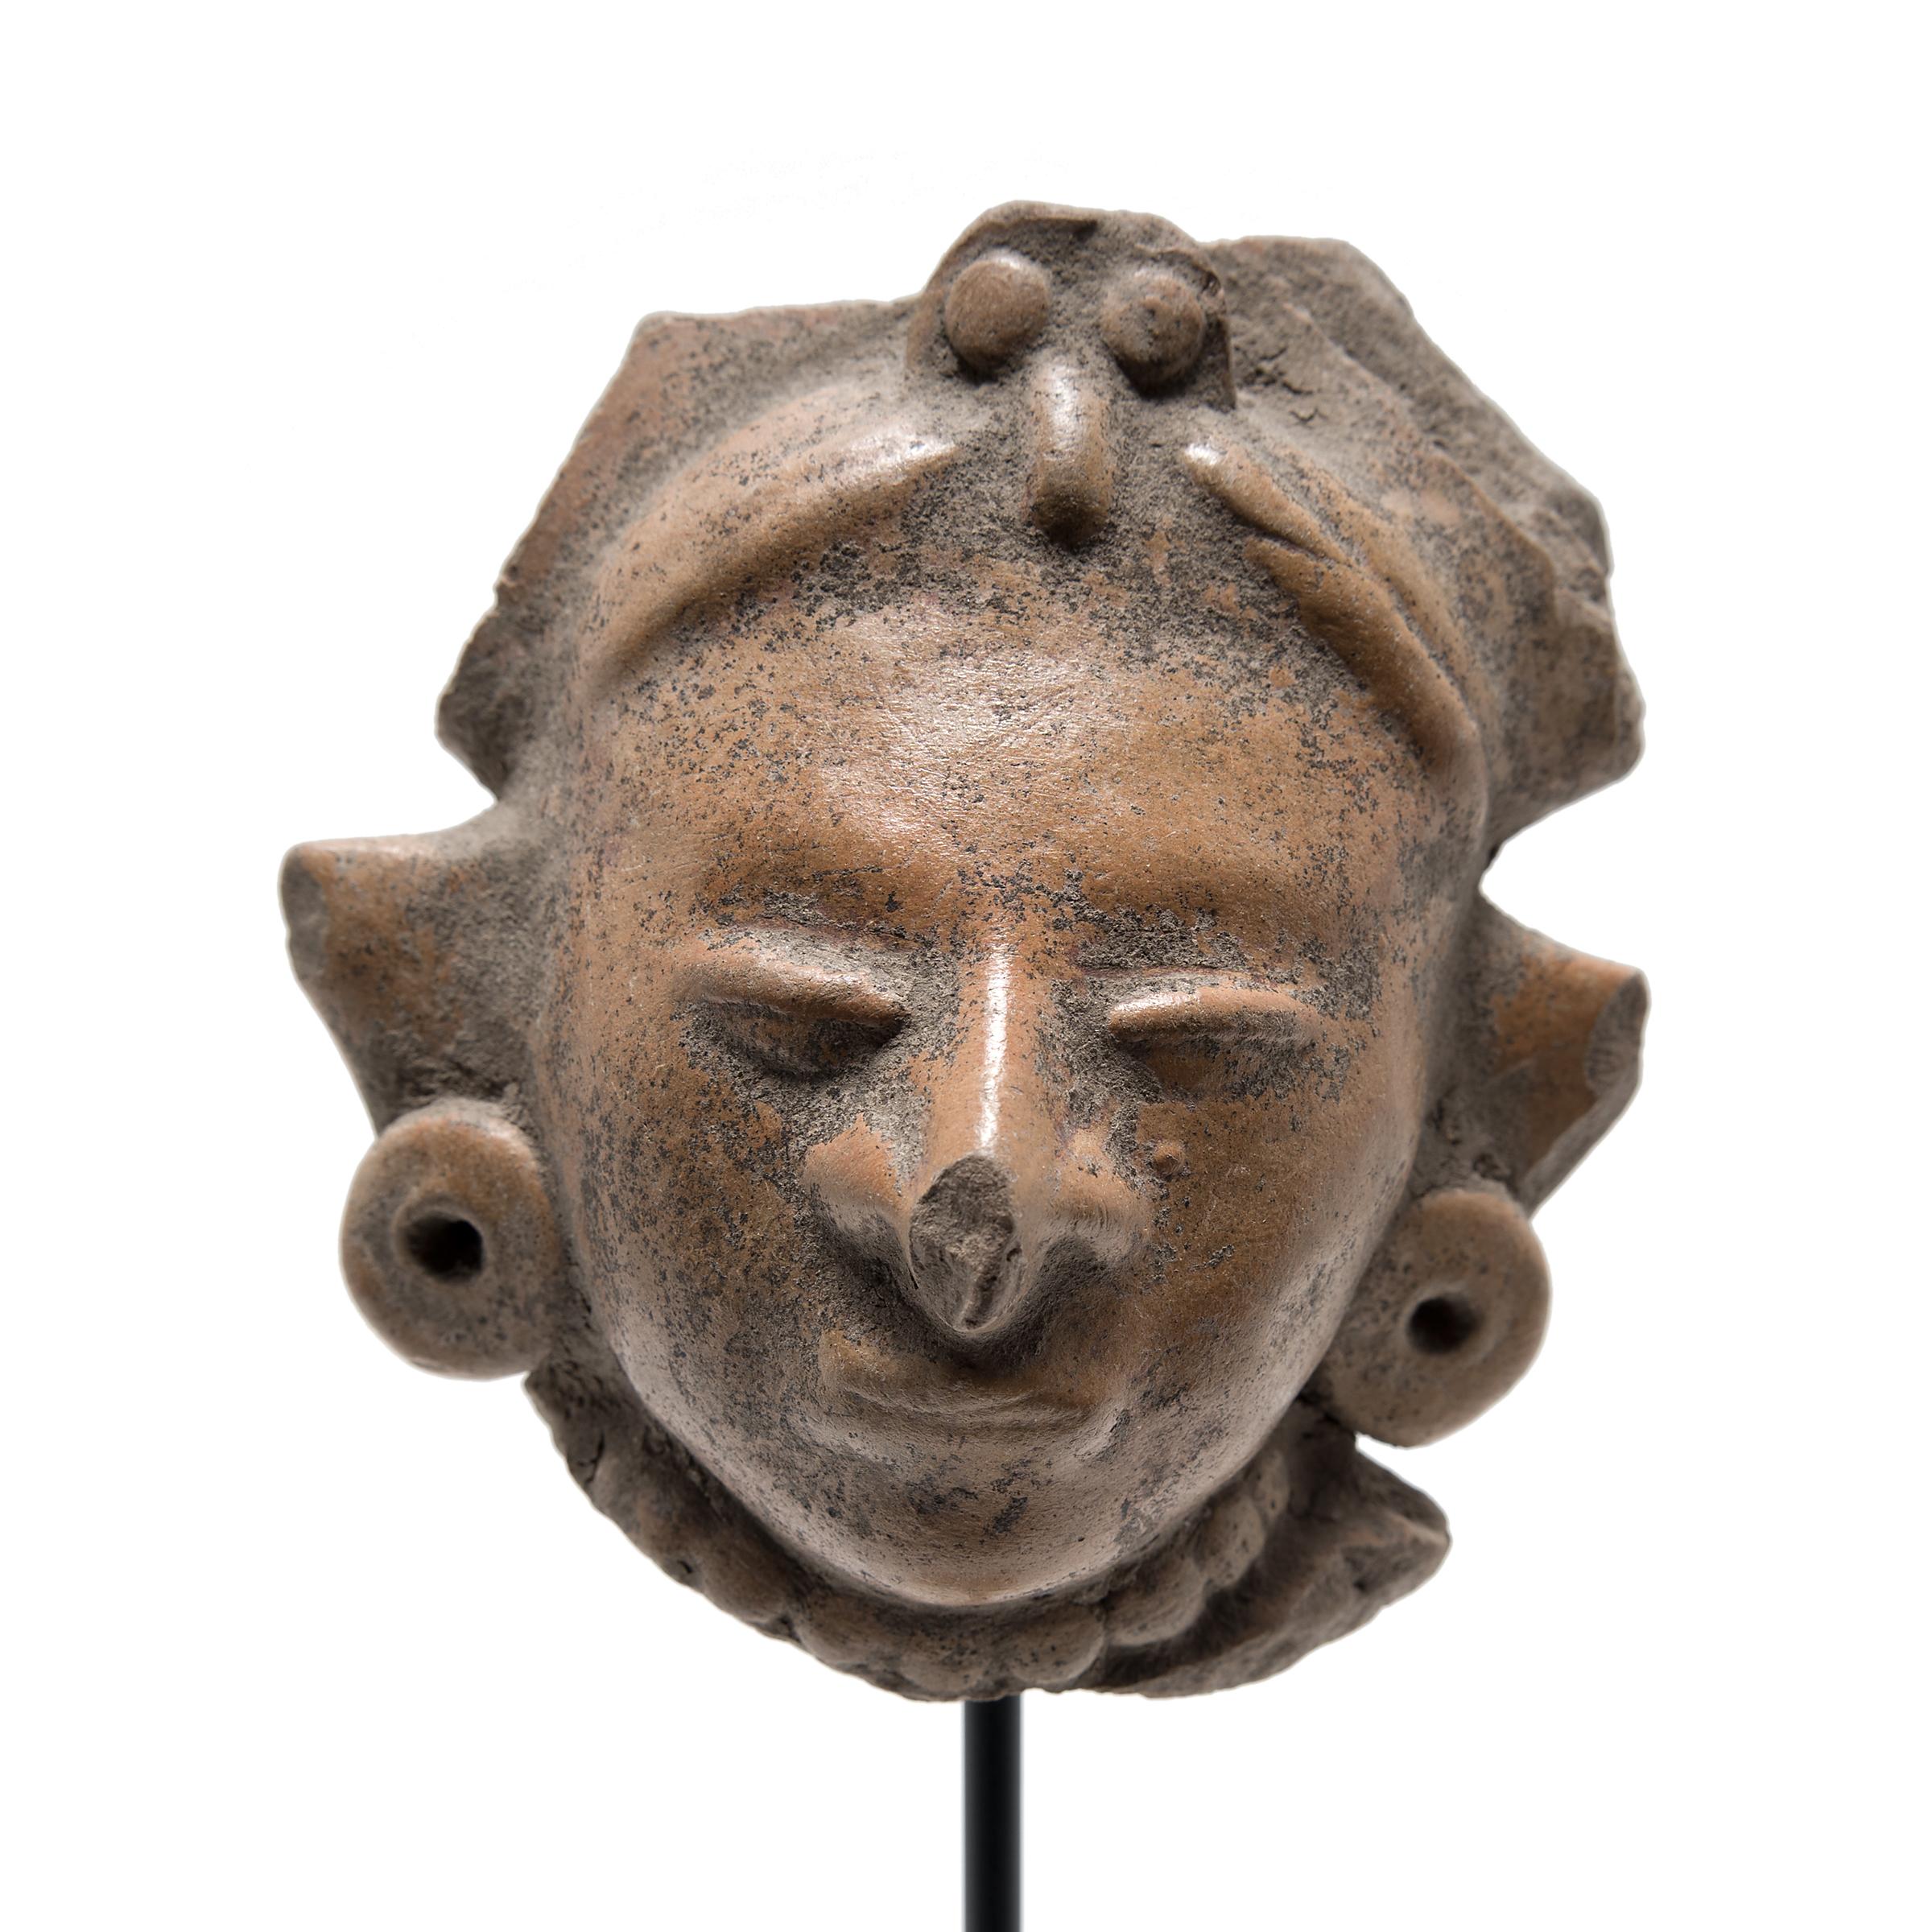 This intriguing head fragment was once attached to a bust or full effigy figurine crafted in 400 A.D. Mesoamerica. Earthenware figurines were made in great abundance throughout Teotihuacan's history. After 250 A.D. objects made from clay increased